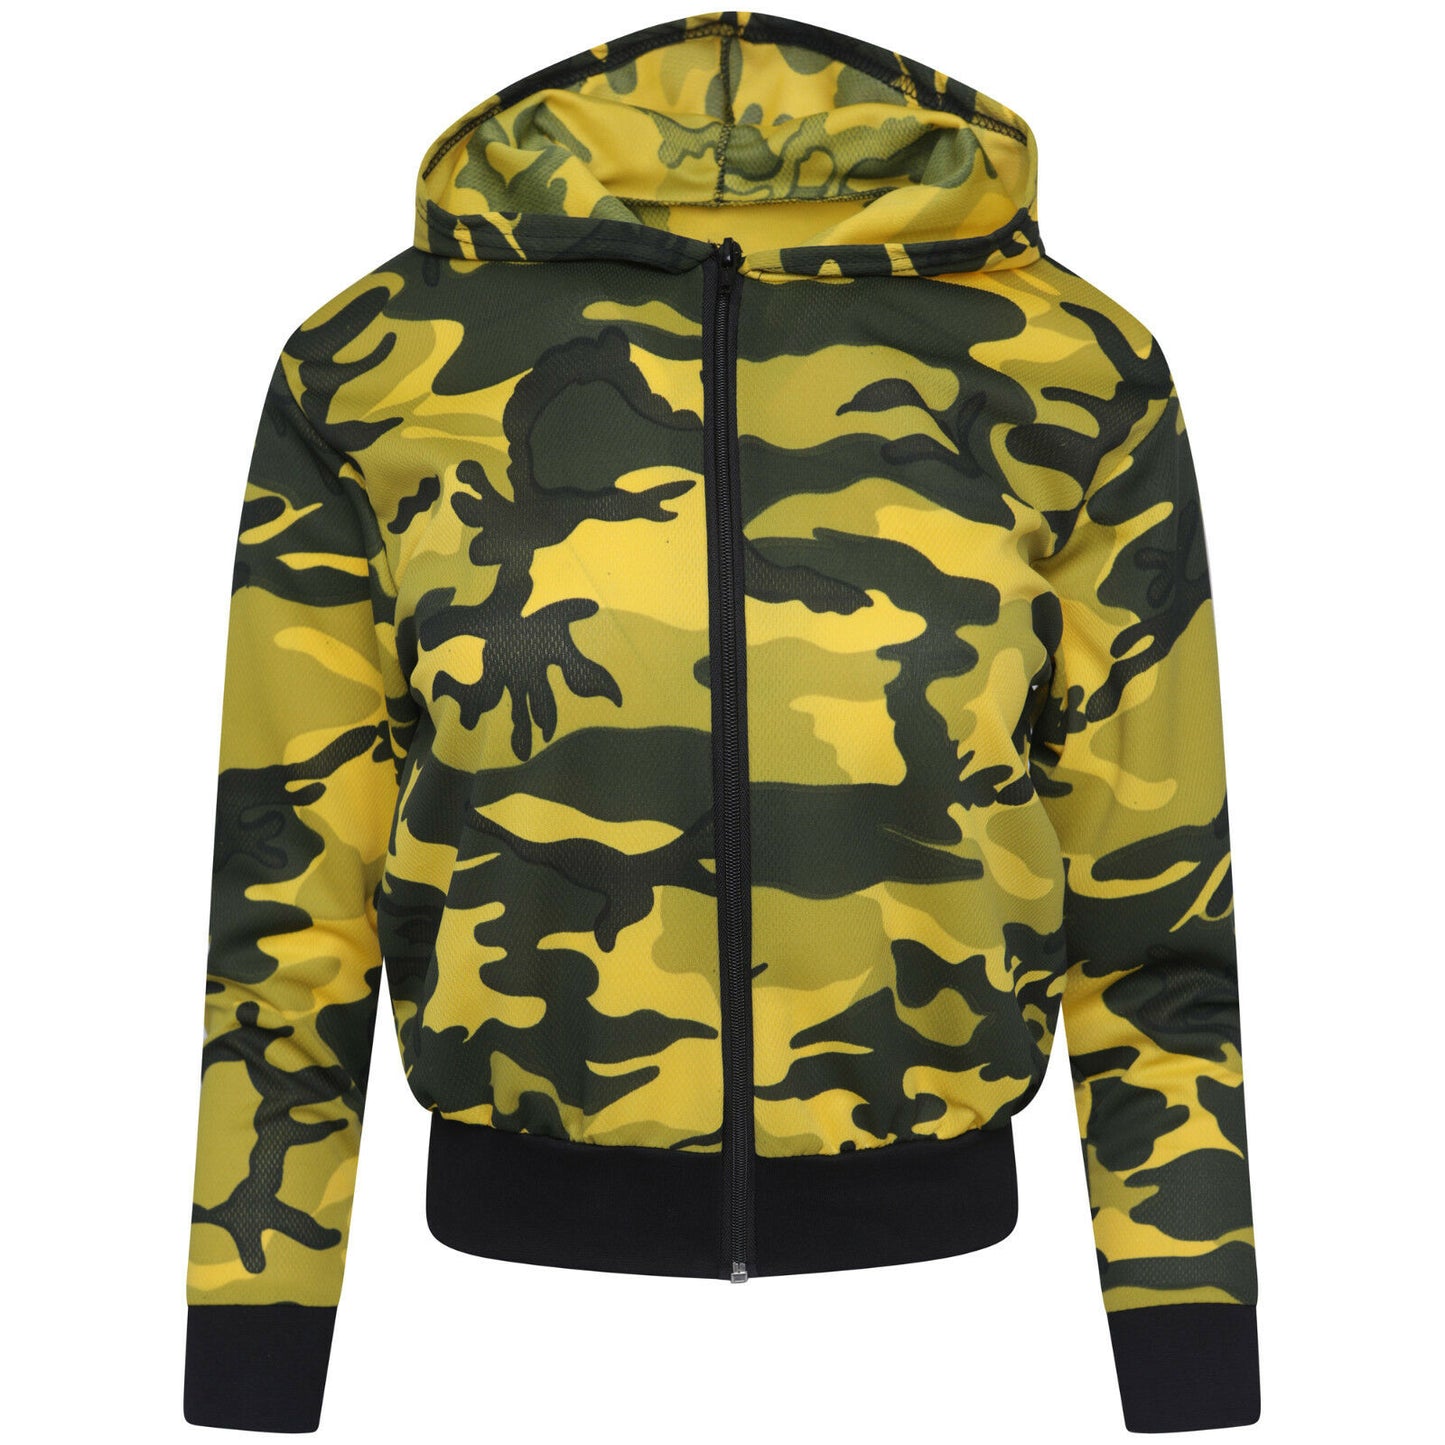 Boys Yellow Camouflage Design Light Weight Jacket. These Are Also Available In Blue. Sizes 7-13 Available. They Are Hooded And Have Black Ribbed Elasticated Waist And Cuffs.